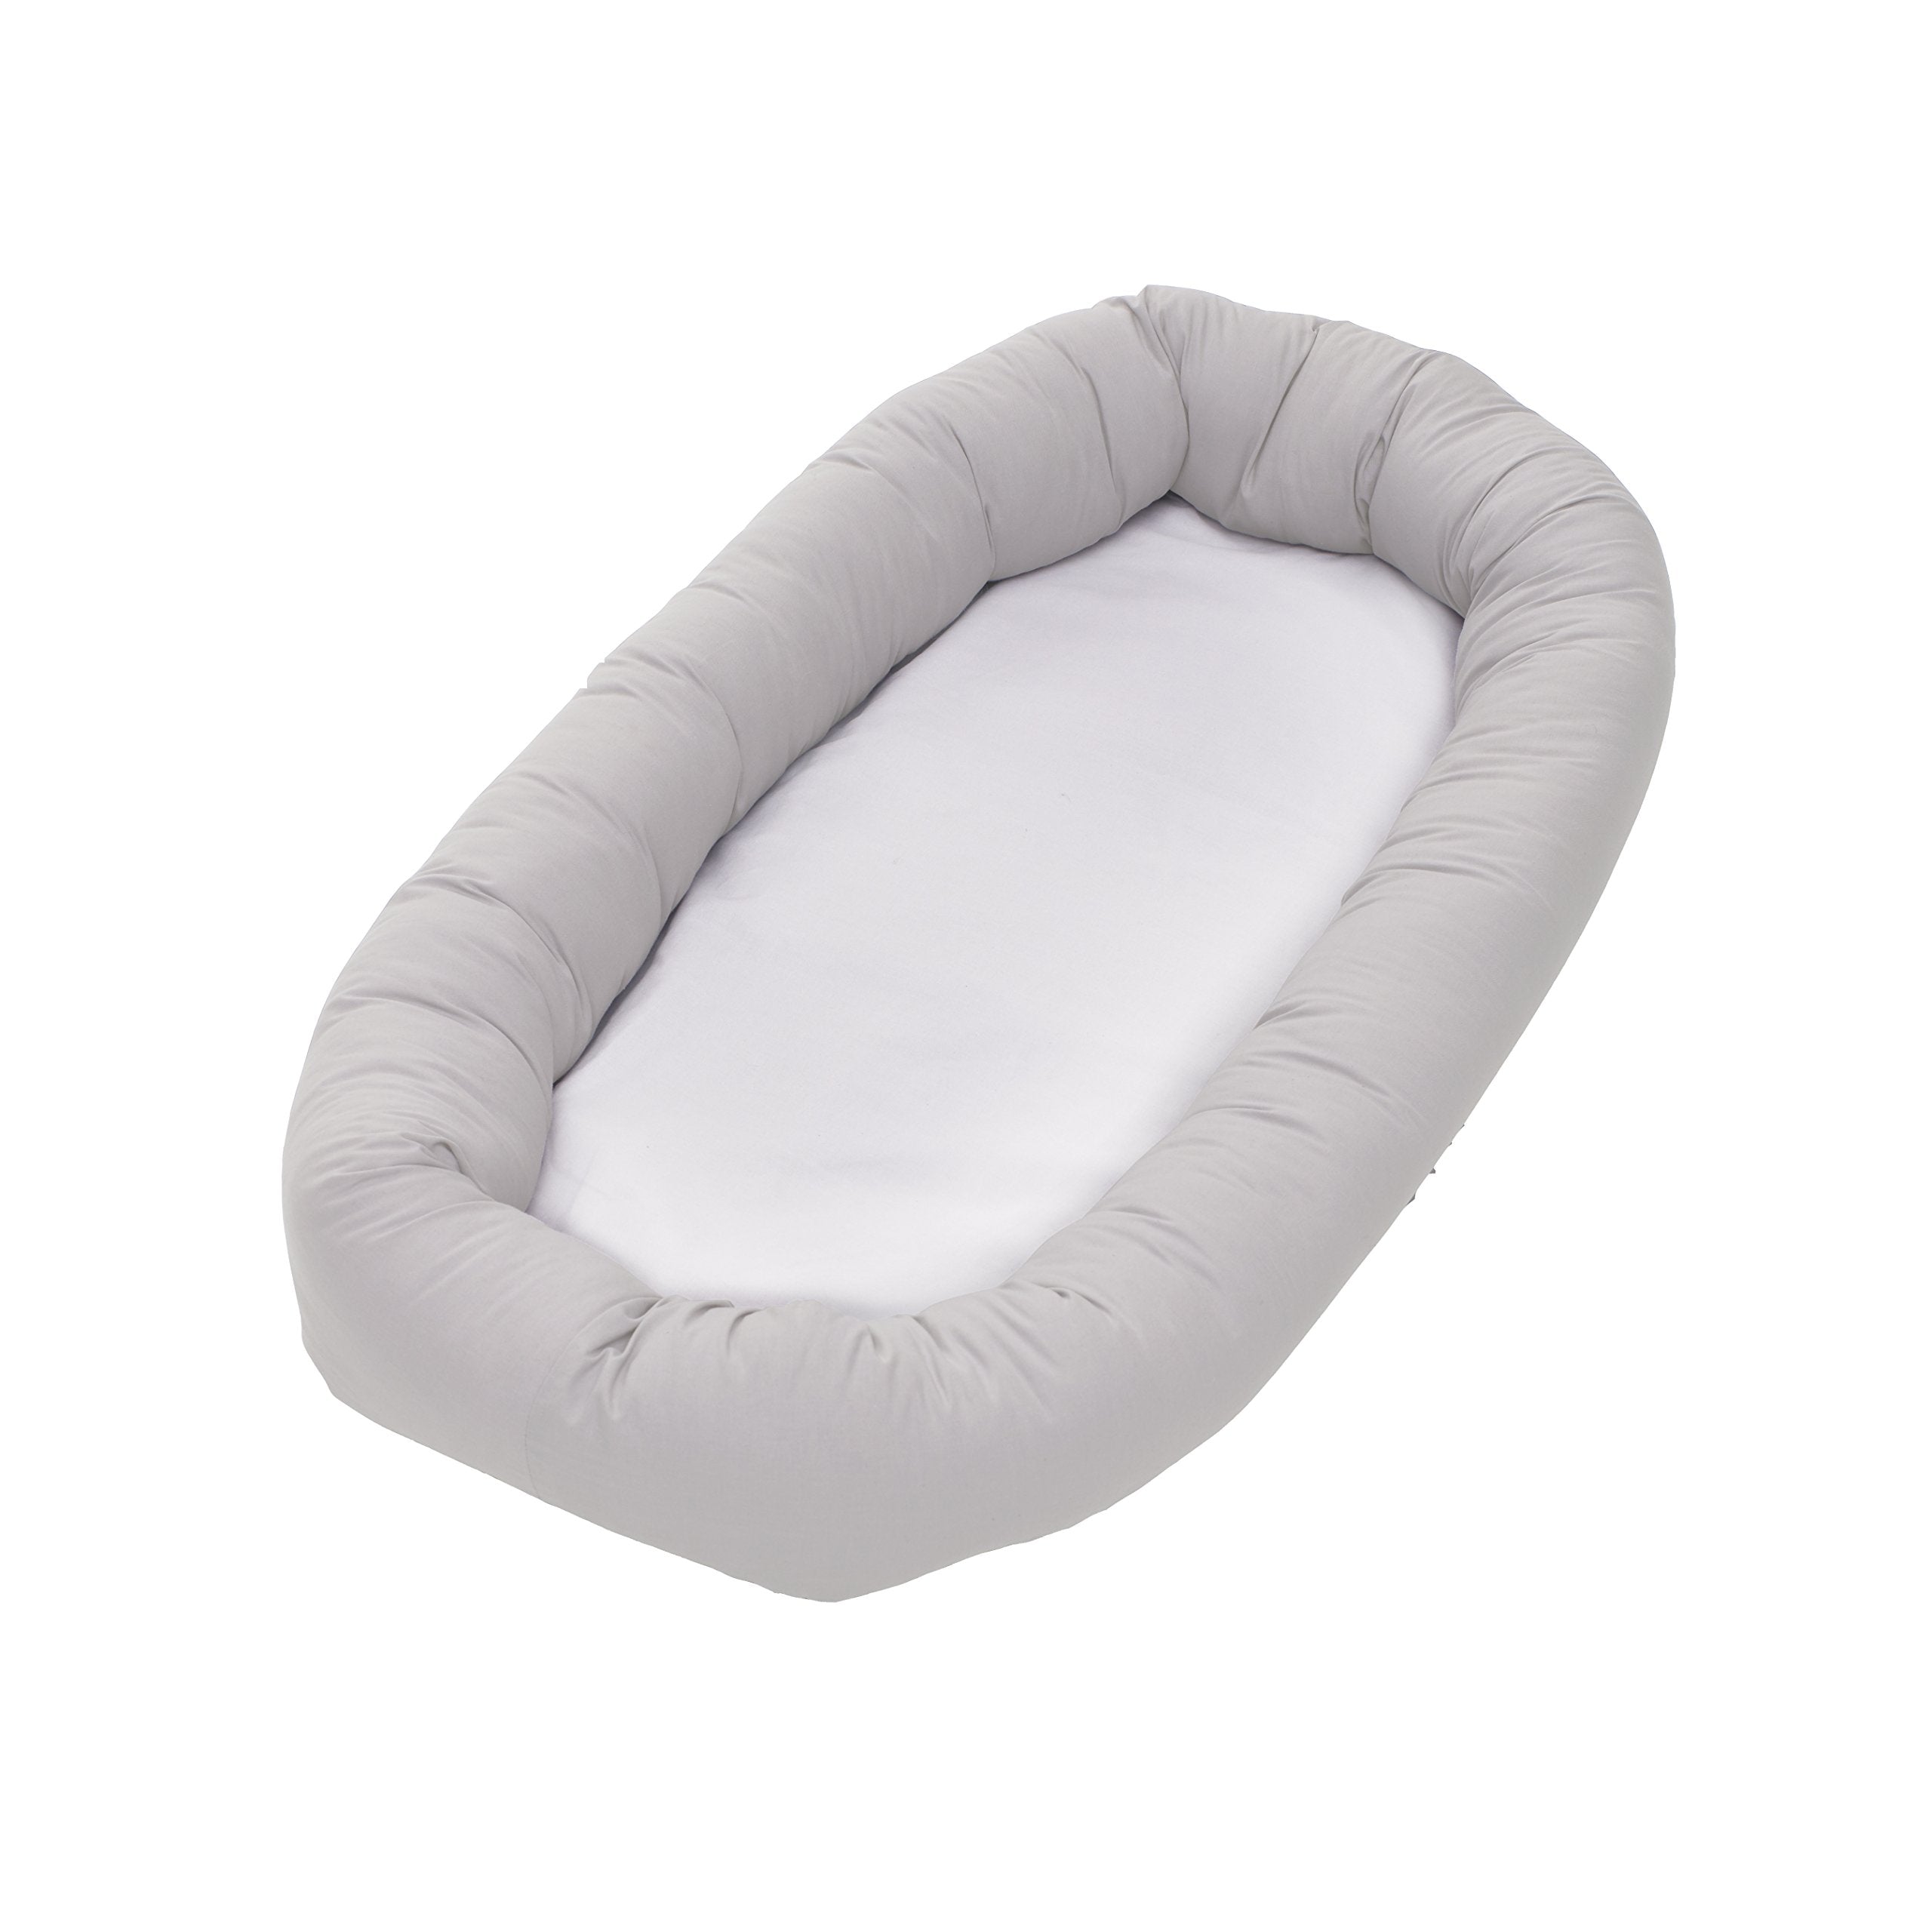 BabyDan Cuddle Nest Baby Sleep Pod Soft Grey (0 to 6 Months) Baby Lounger, Pod, Cot, Bed. Aid for Baby Sleeping.